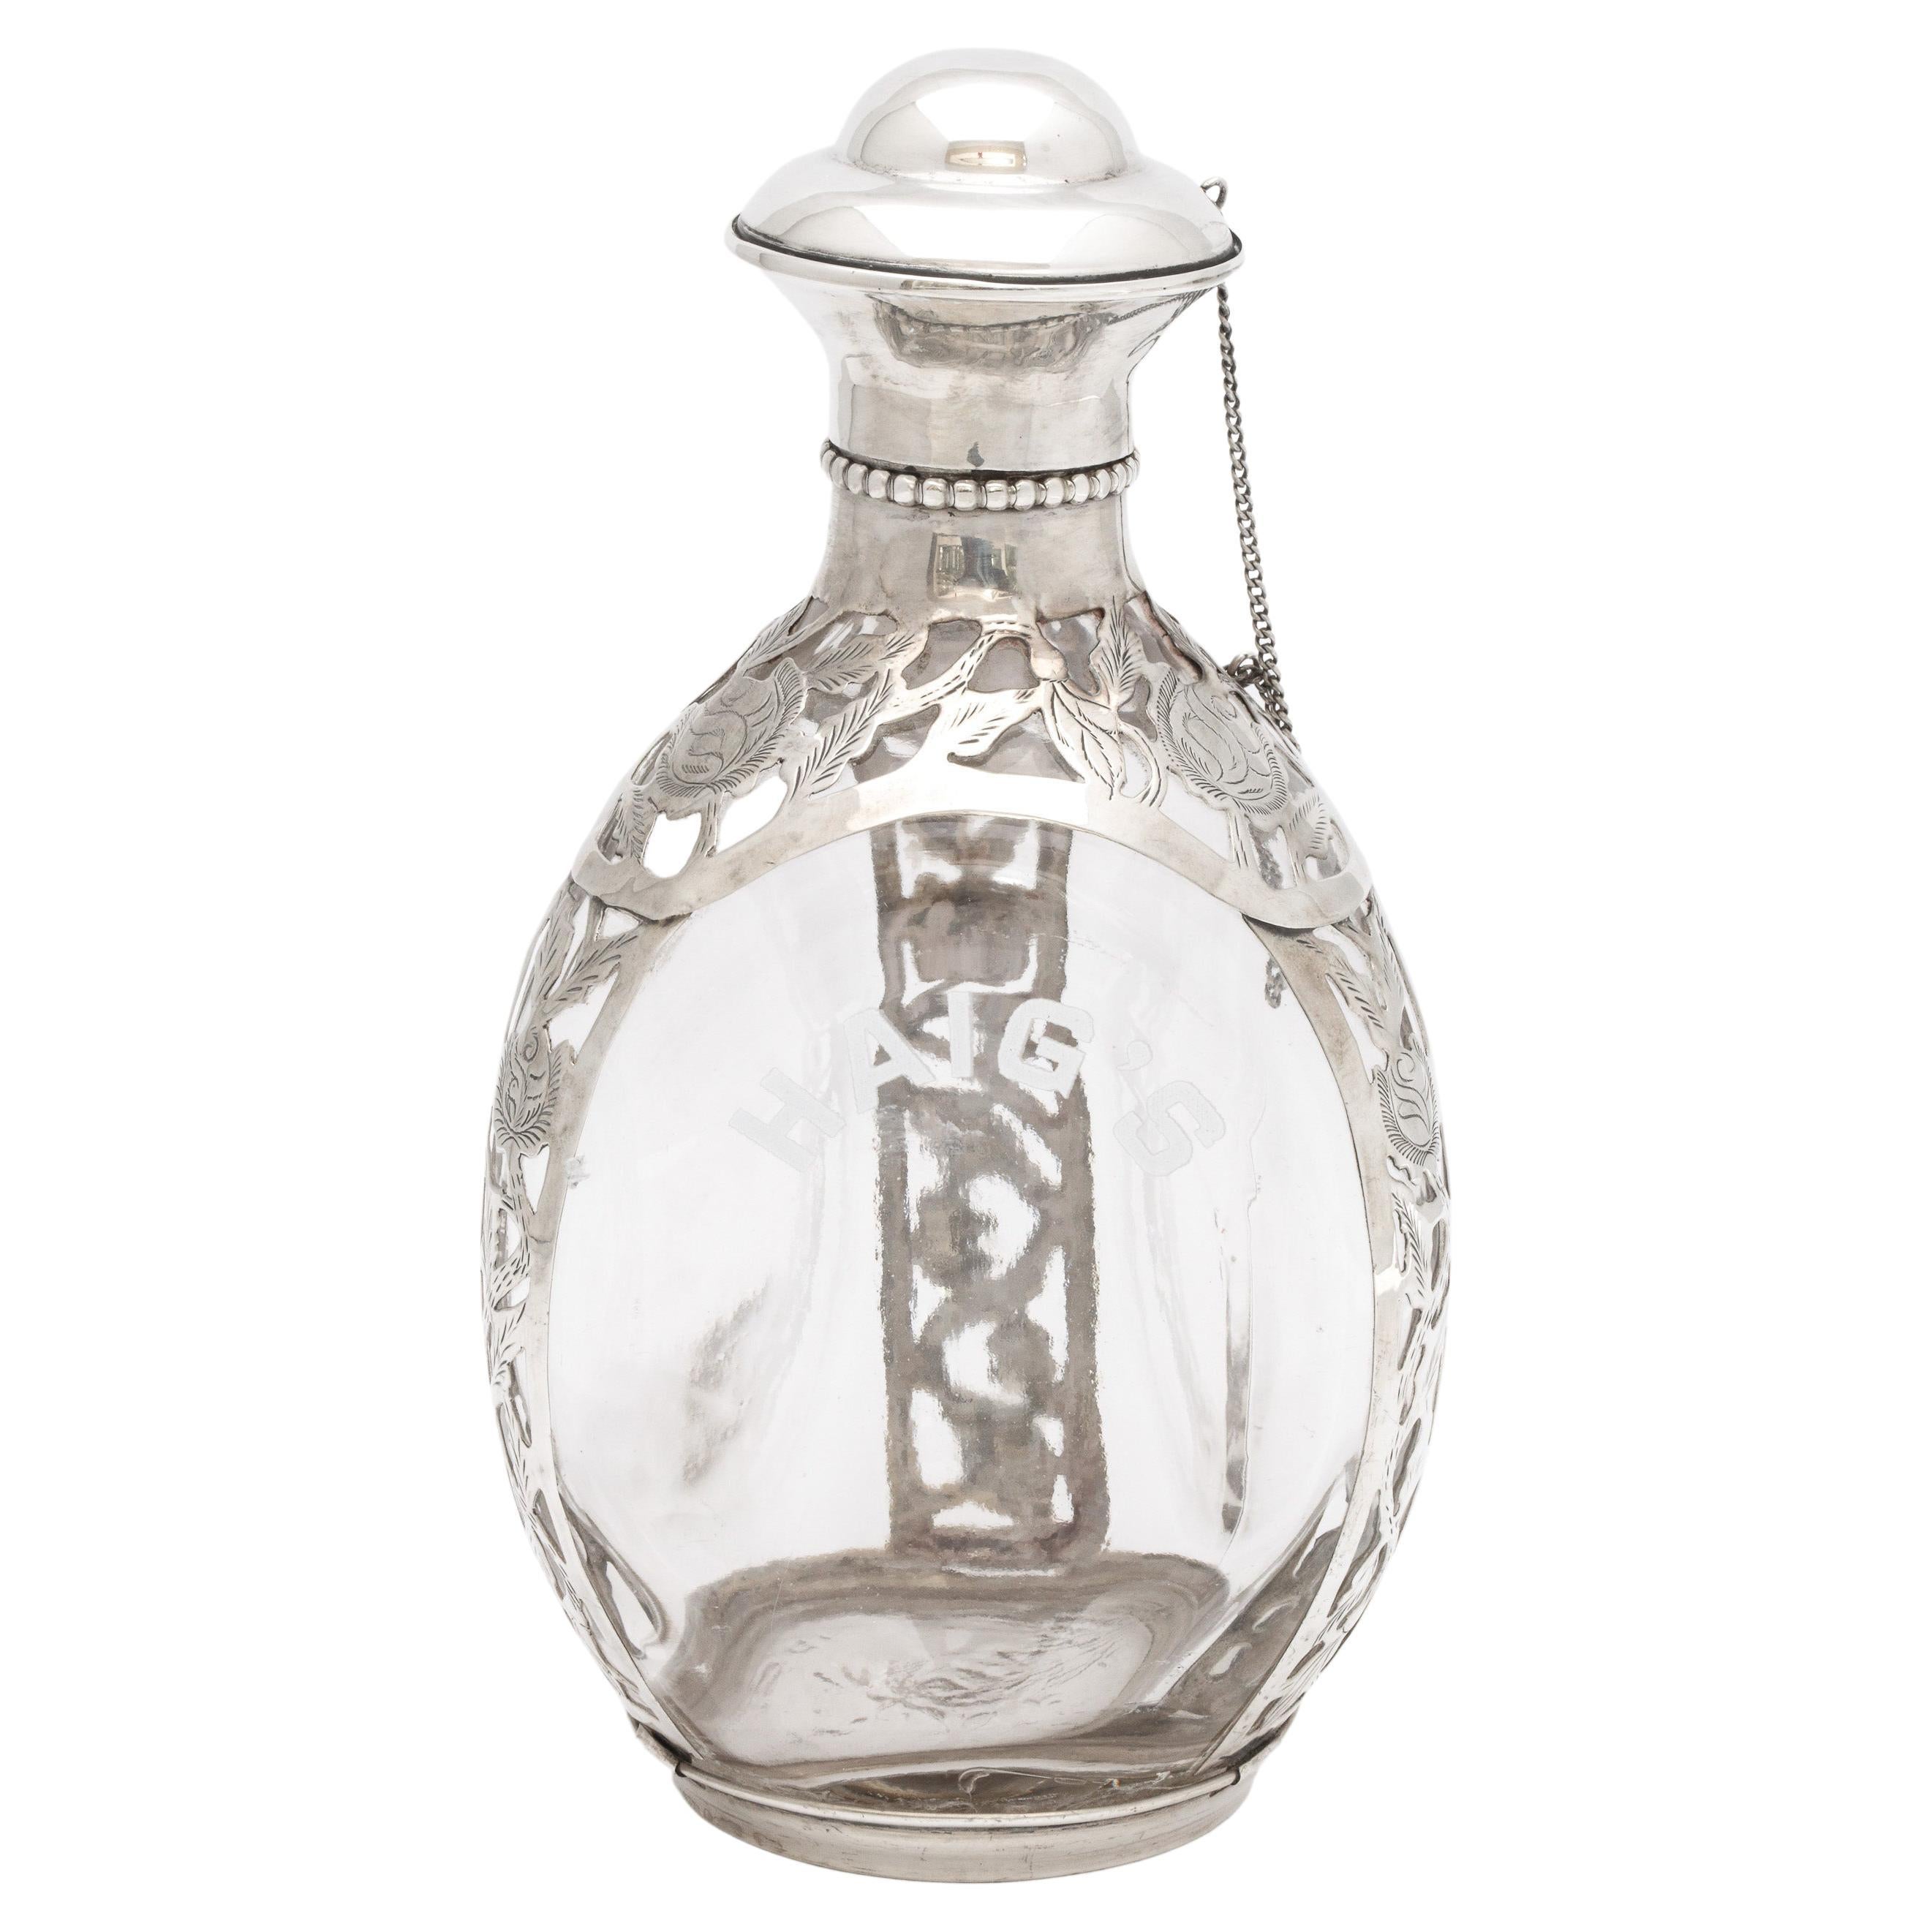 Mid-Century Modern Sterling Silver Floral Overlay Haig's Scotch Bottle